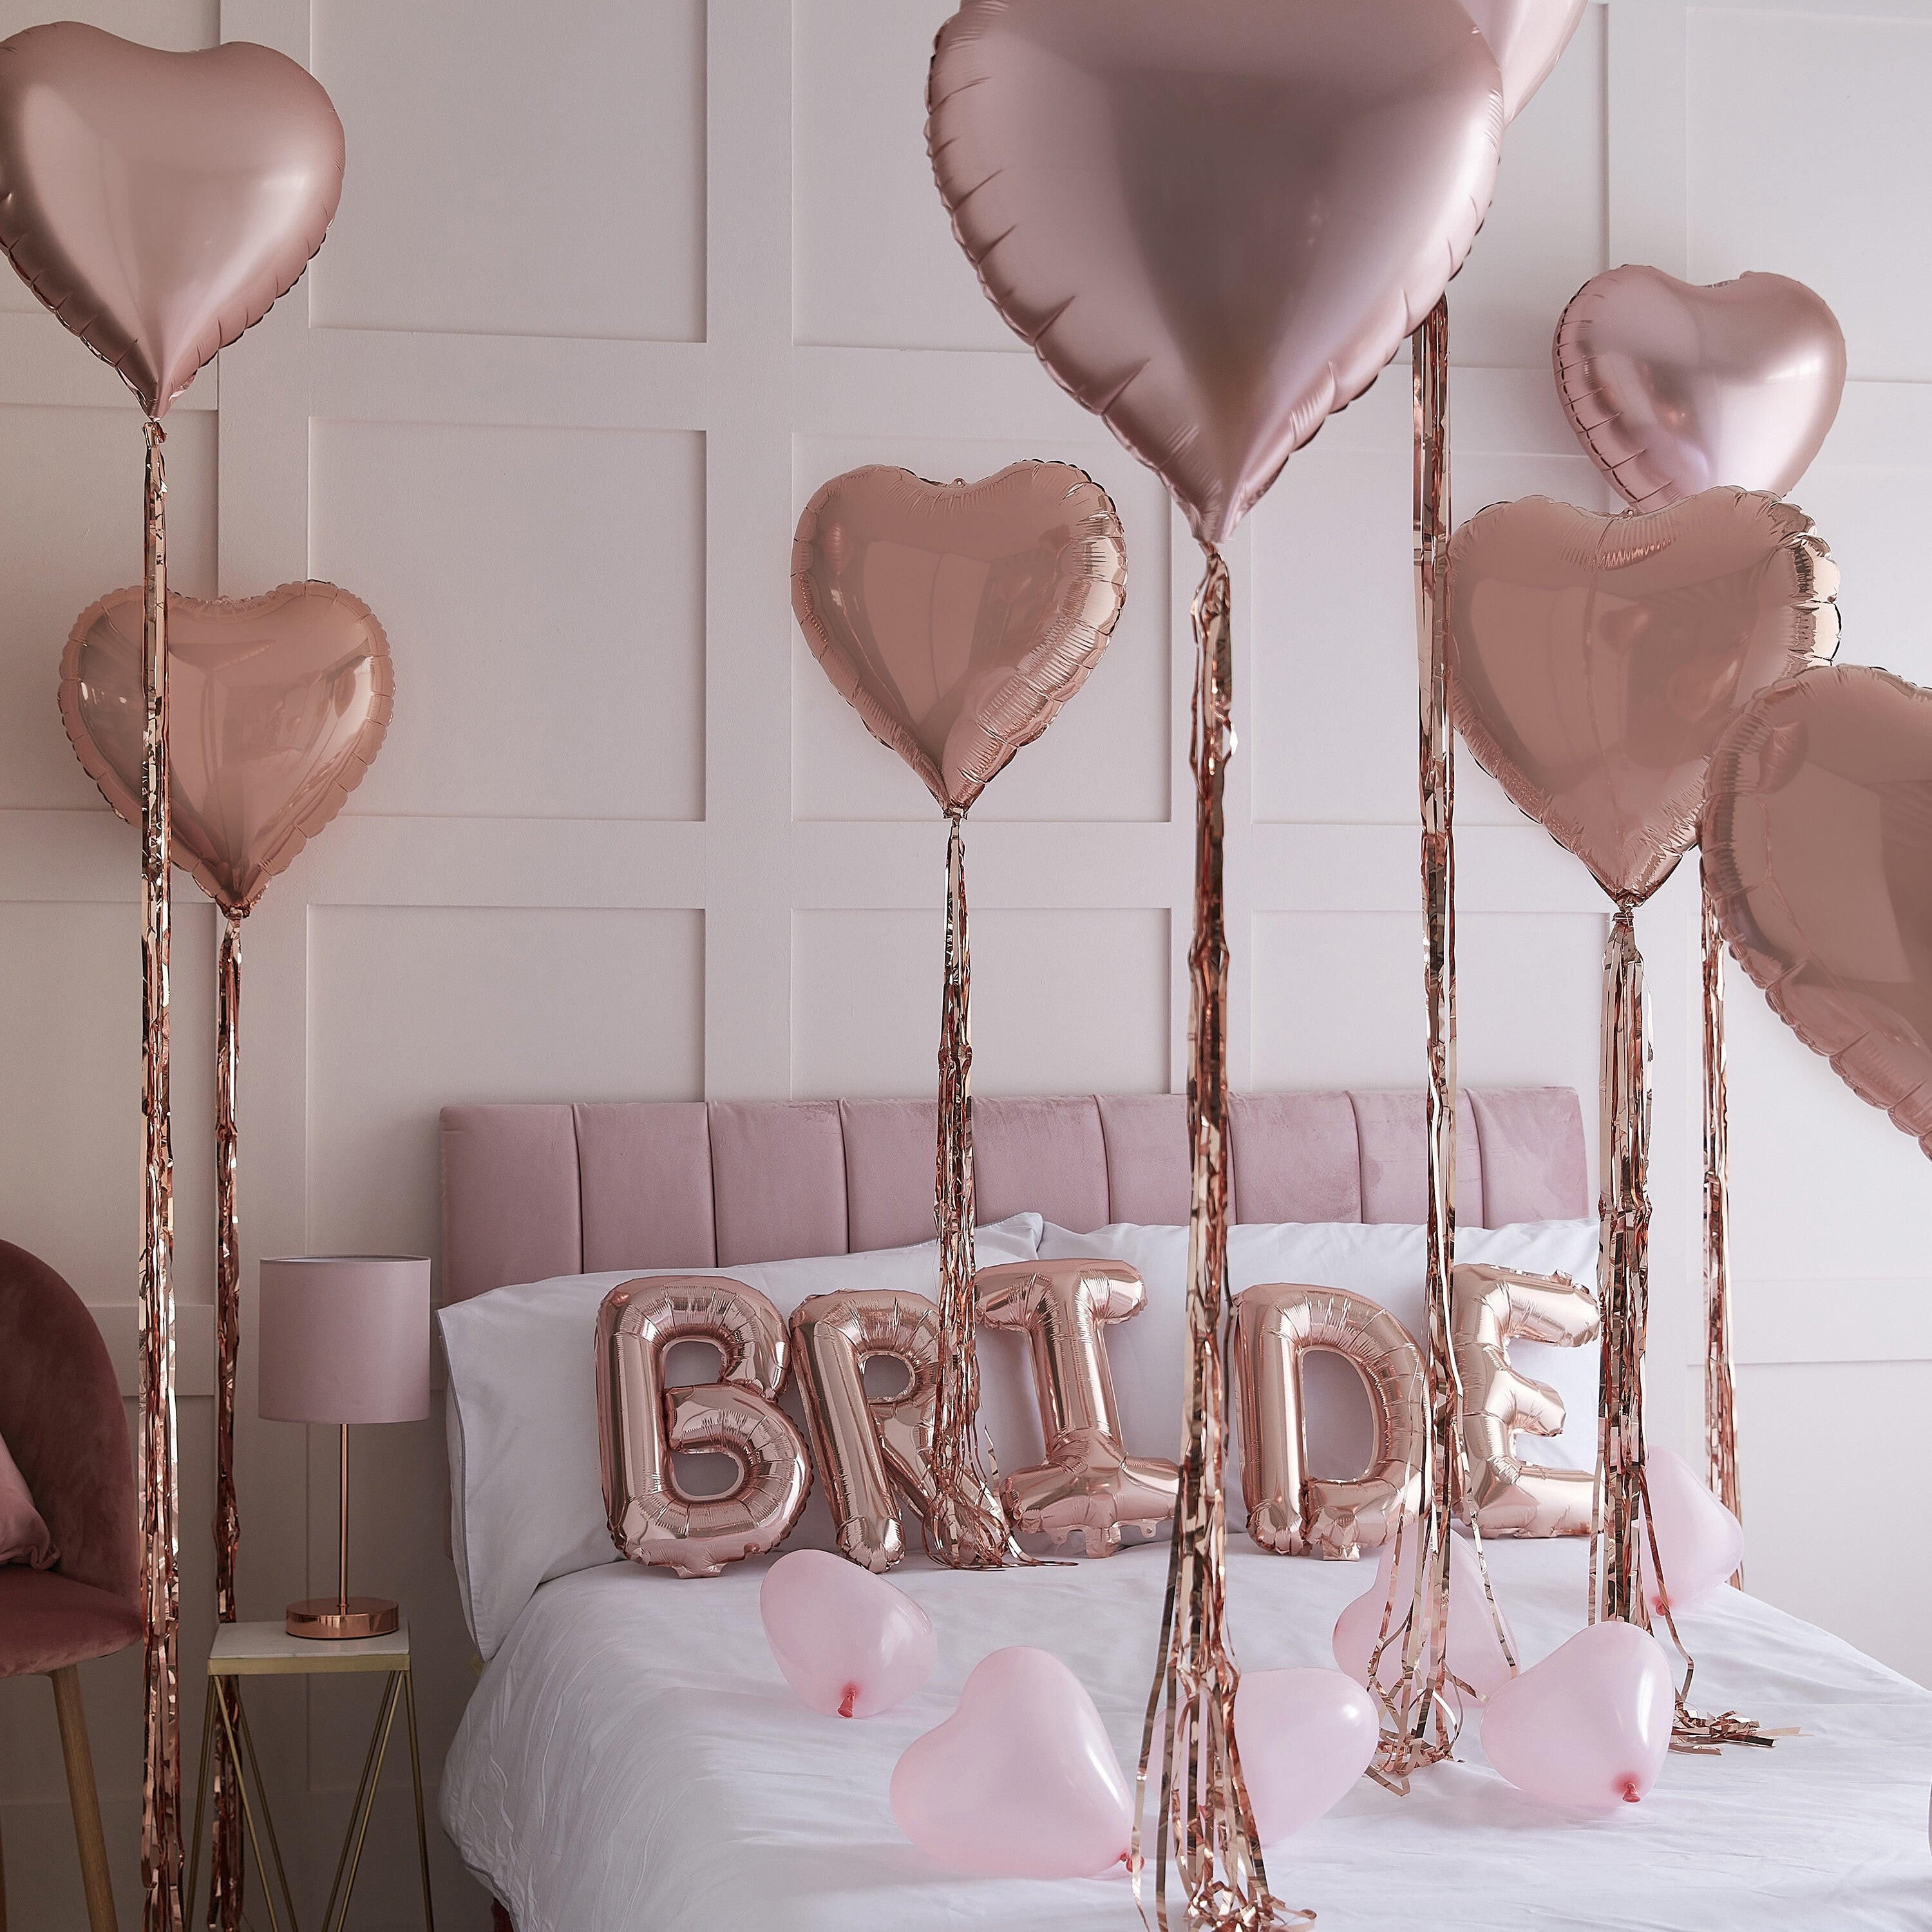 Rose Gold Bride Heart Balloons Kit Hen Party Decorations - Etsy